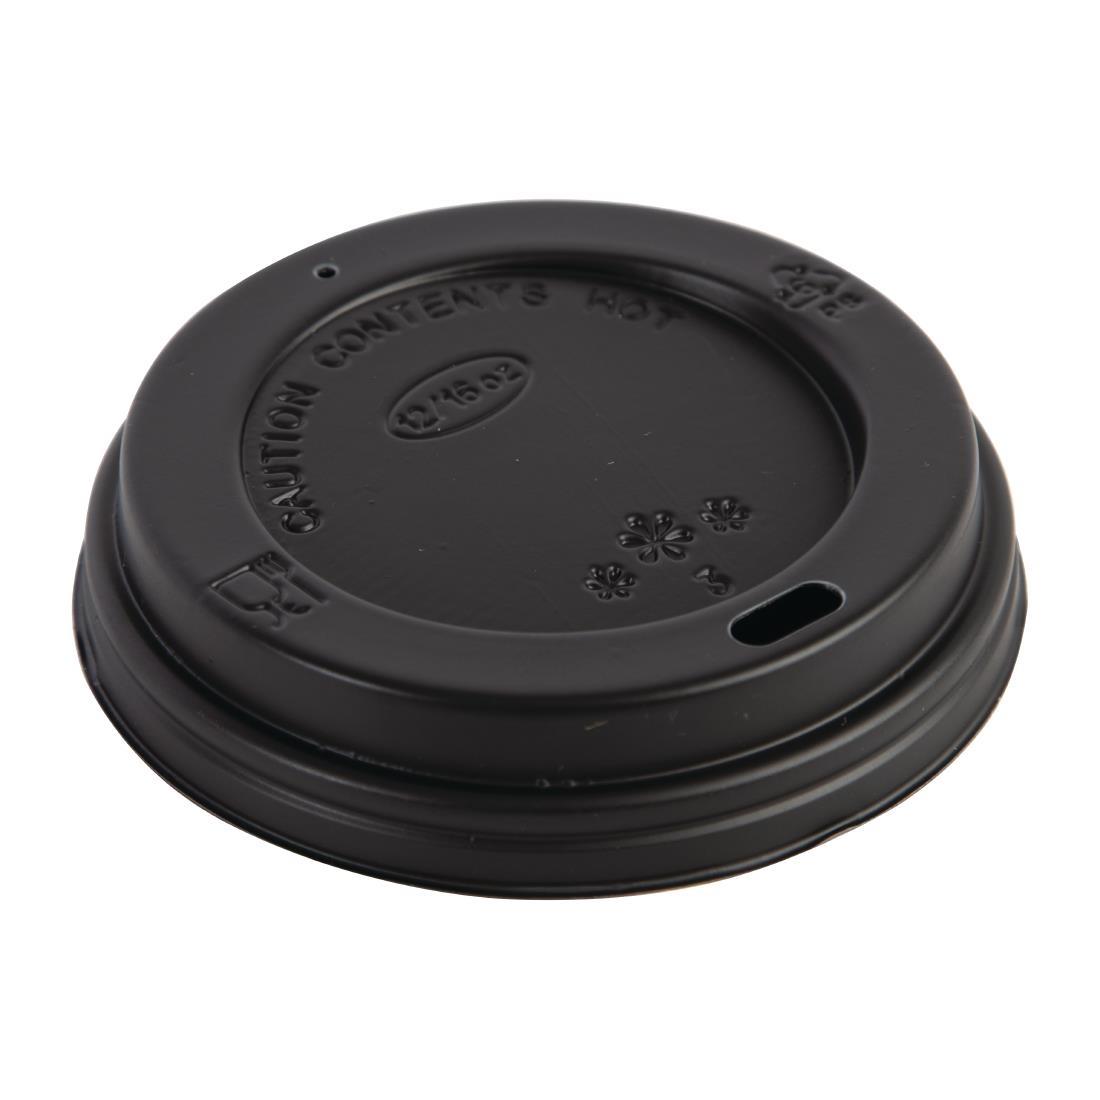 Fiesta Recyclable Coffee Cup Lids Black 340ml / 12oz and 455ml / 16oz (Pack of 50) - CW717  - 1